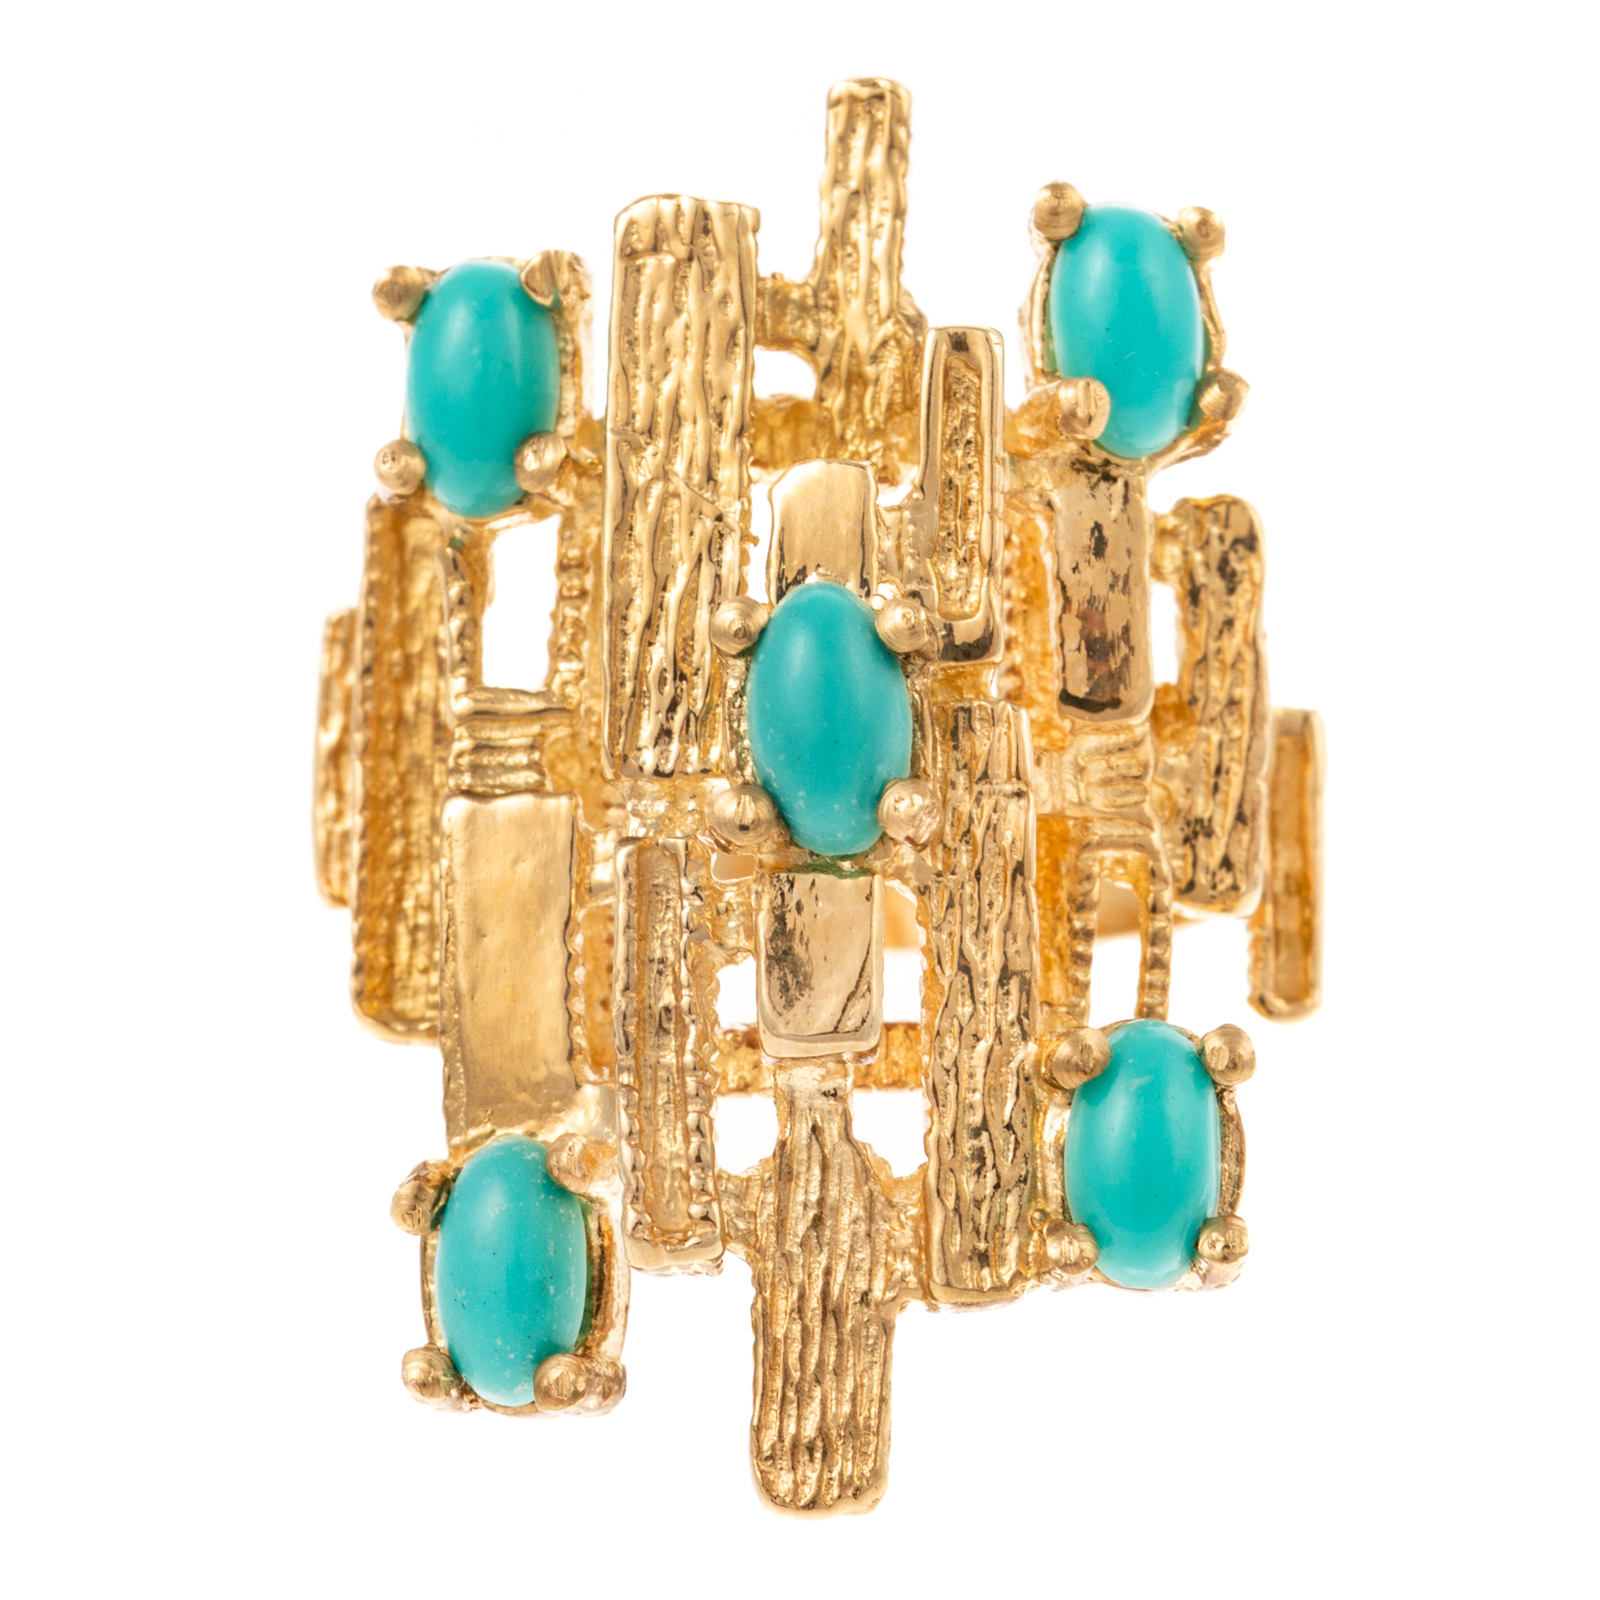 A BRUTALIST TURQUOISE RING IN 14K 2e8f48